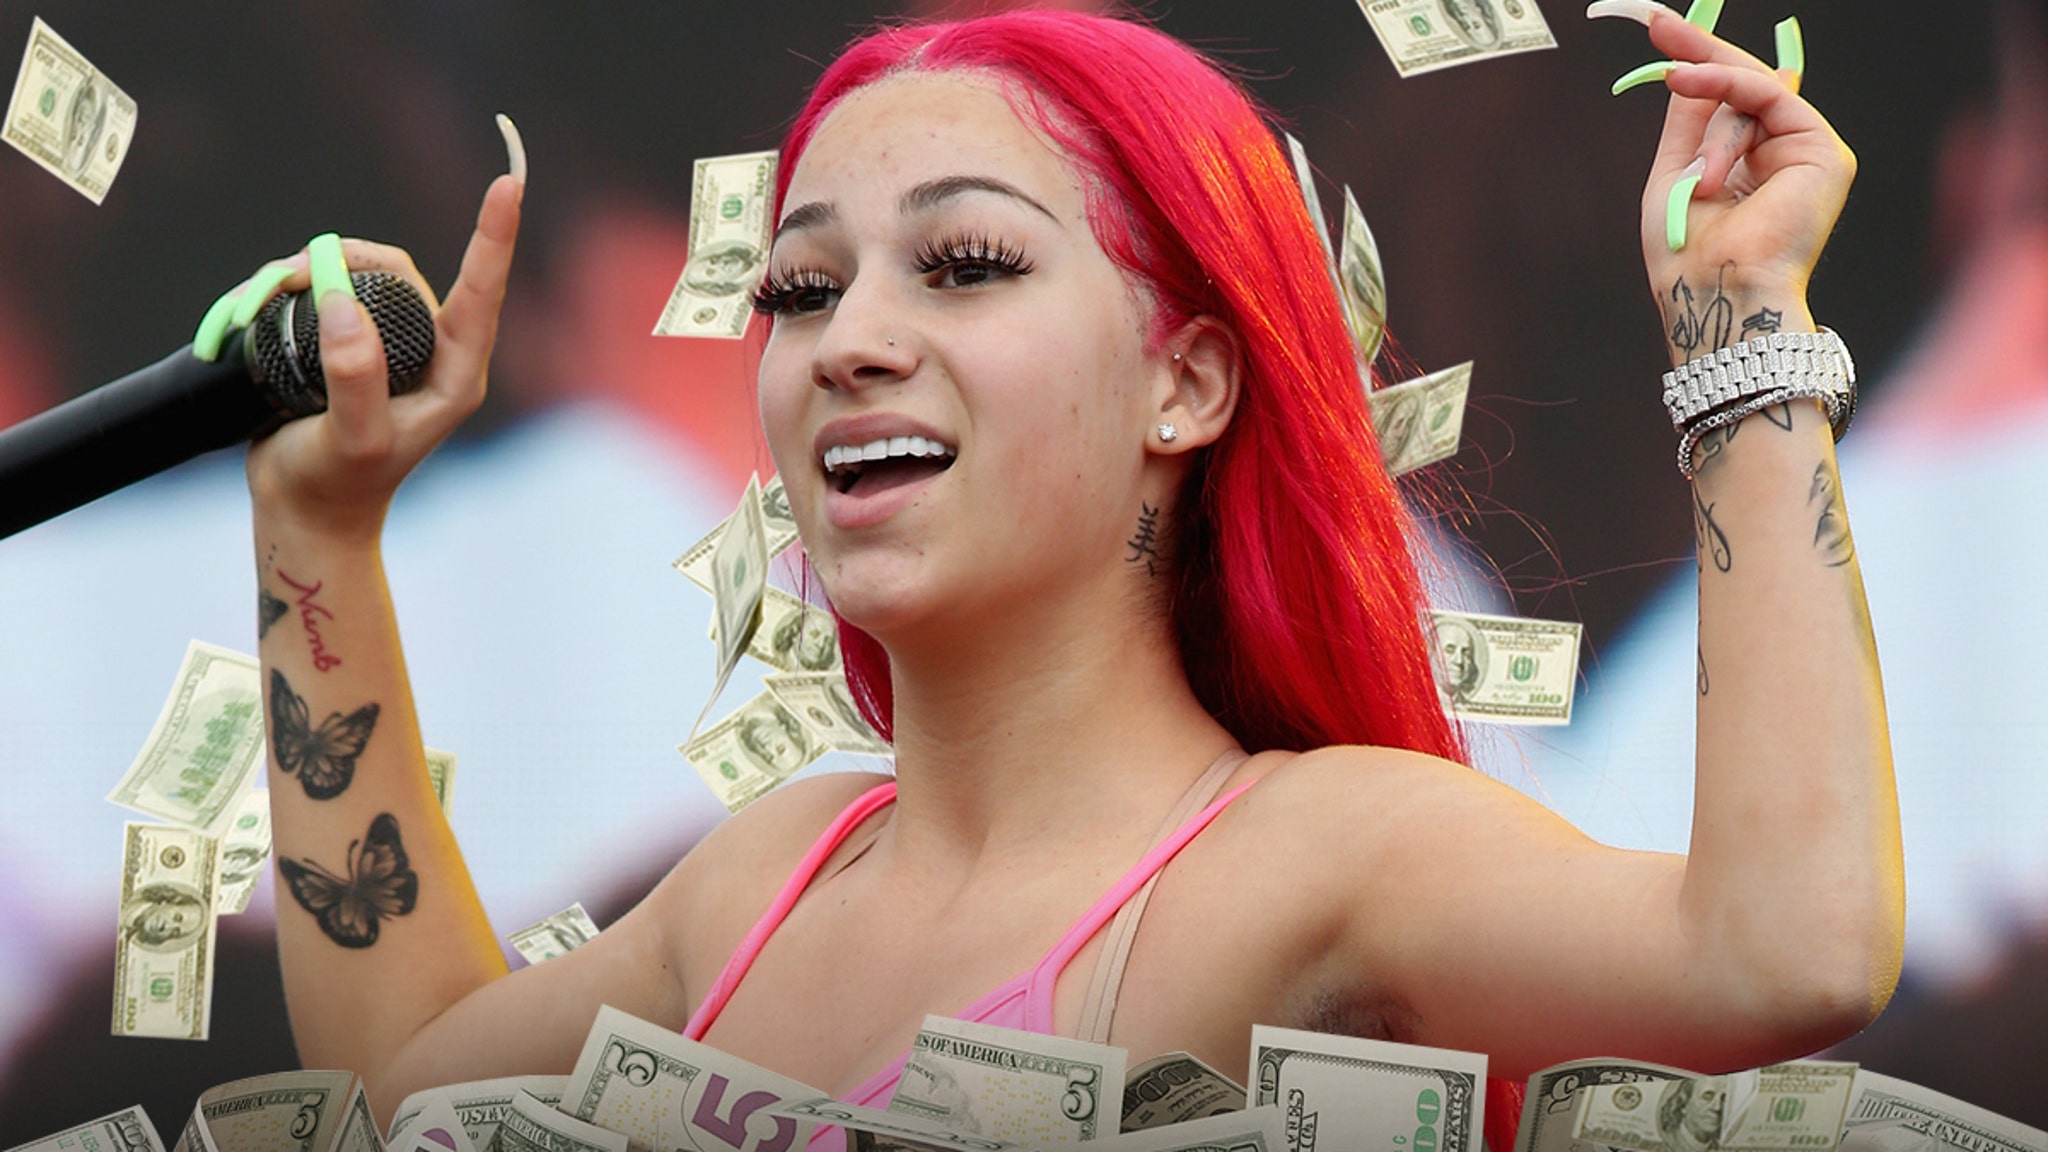 Bhad Bhabie posts $57 million earnings statement for OnlyFans